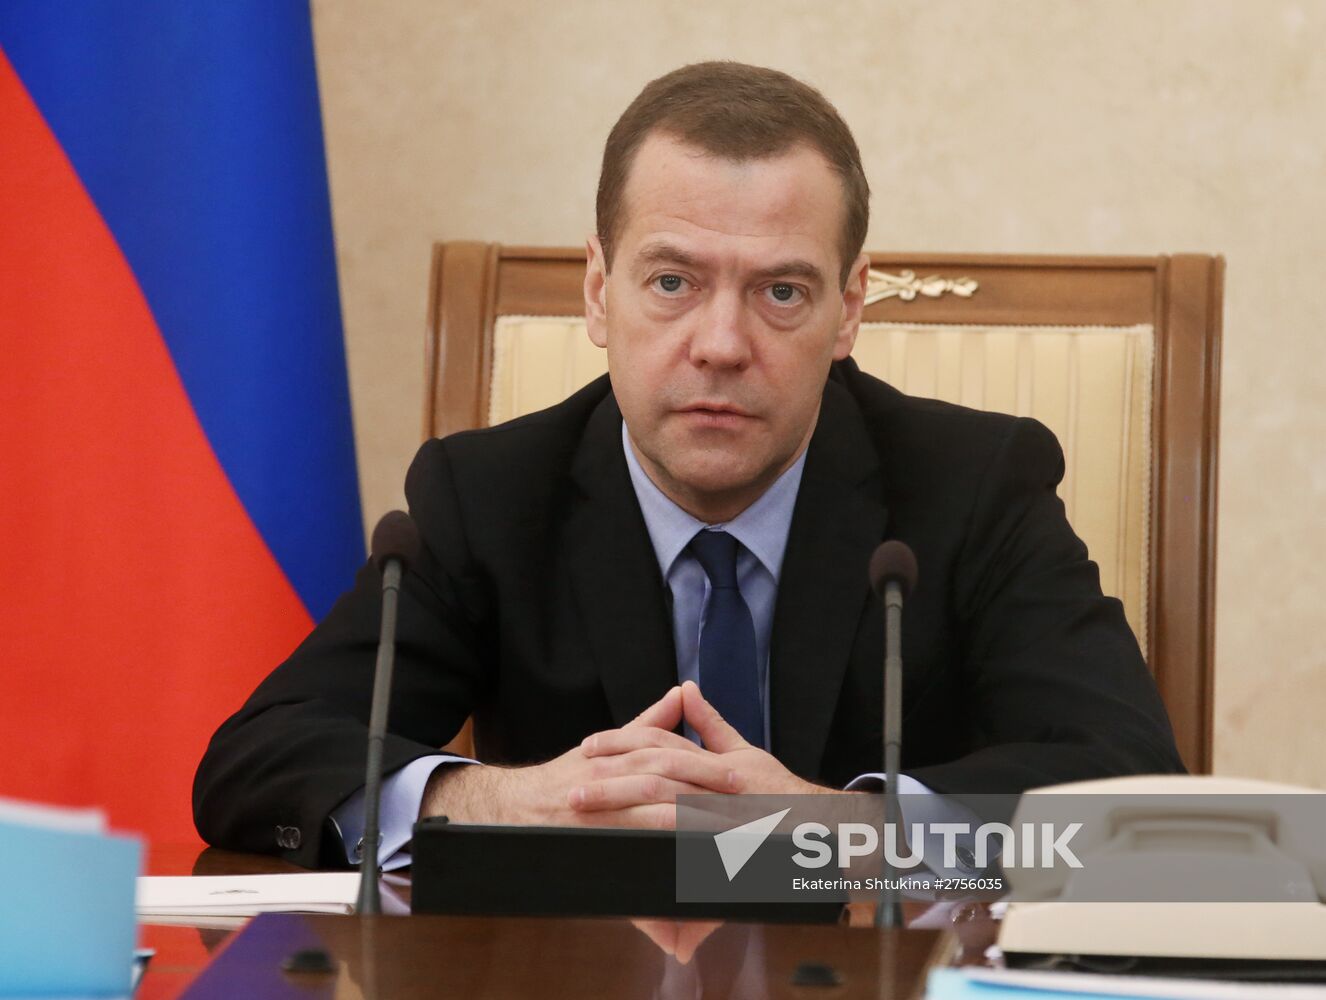 Prime Minister Dmitry Medvedev holds meeting of Commission on Monitoring Foreign Investment